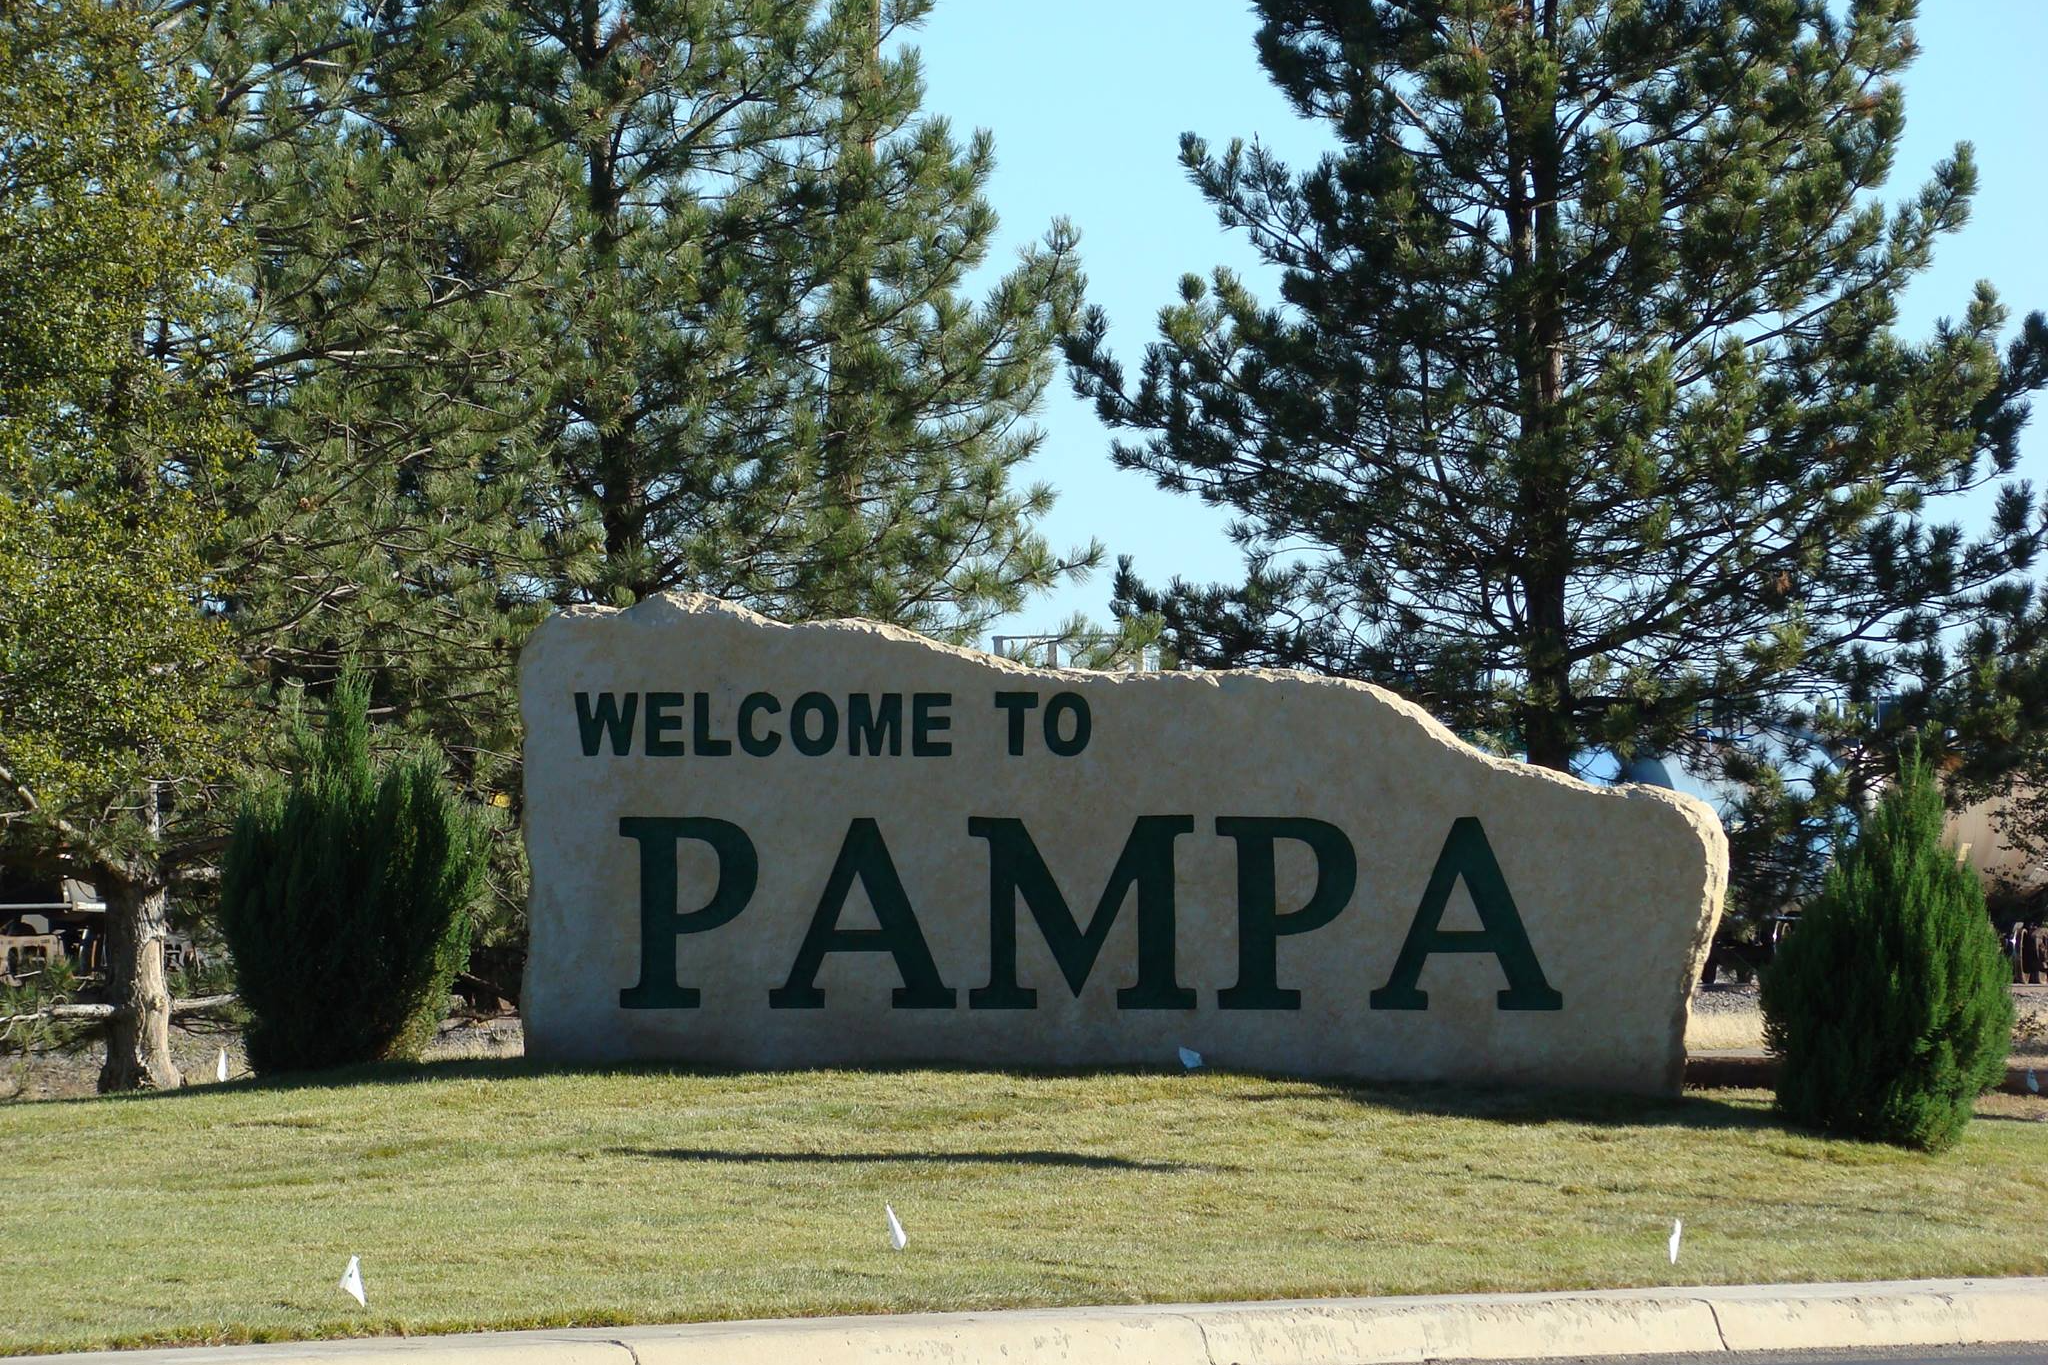 Welcome to pampa sign